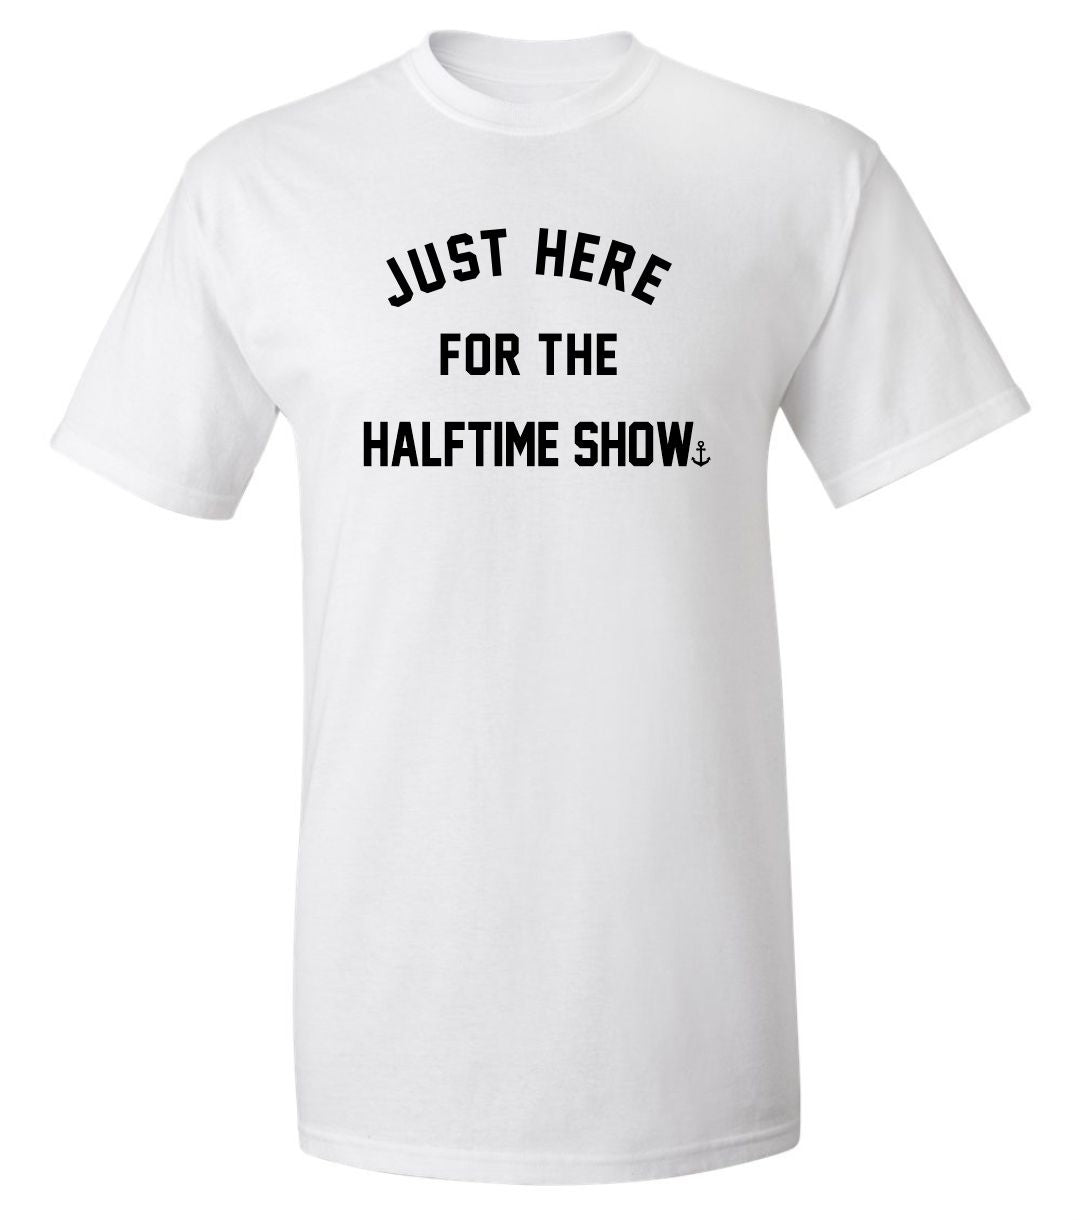 "Just Here For The Halftime Show" T-Shirt